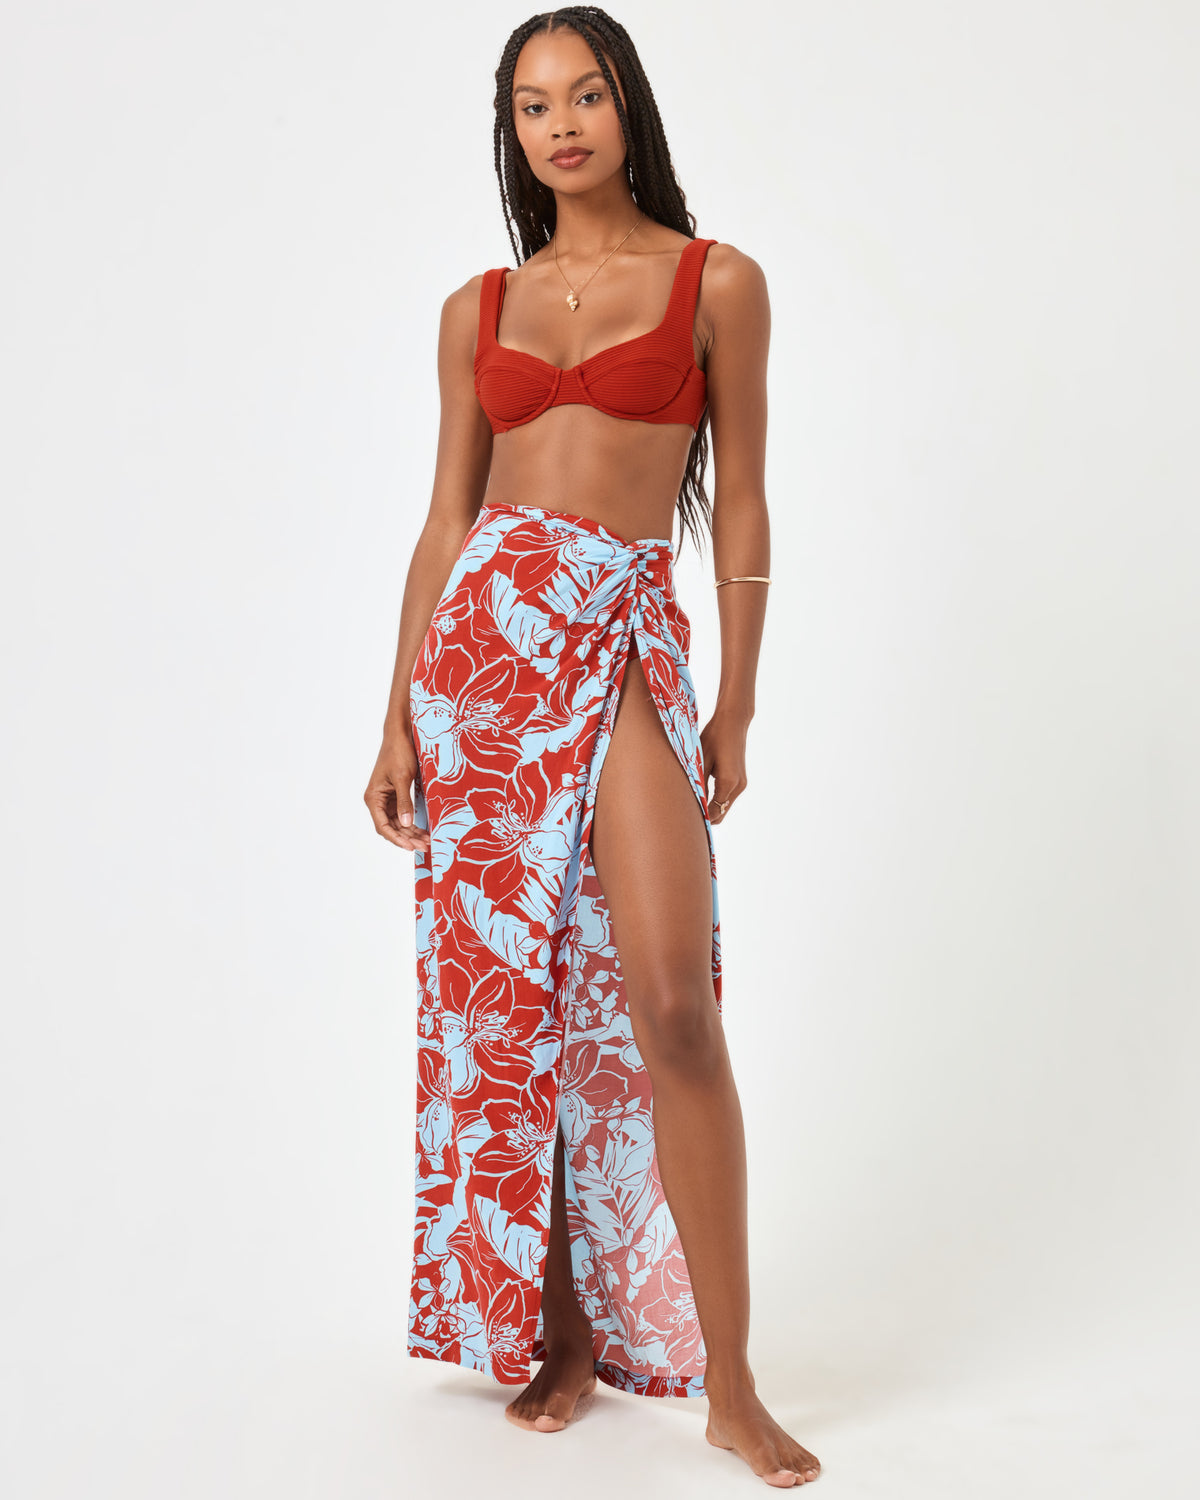 Printed Mia Cover-Up - Going Tropical Going Tropical | Model: Taelor (size: S)